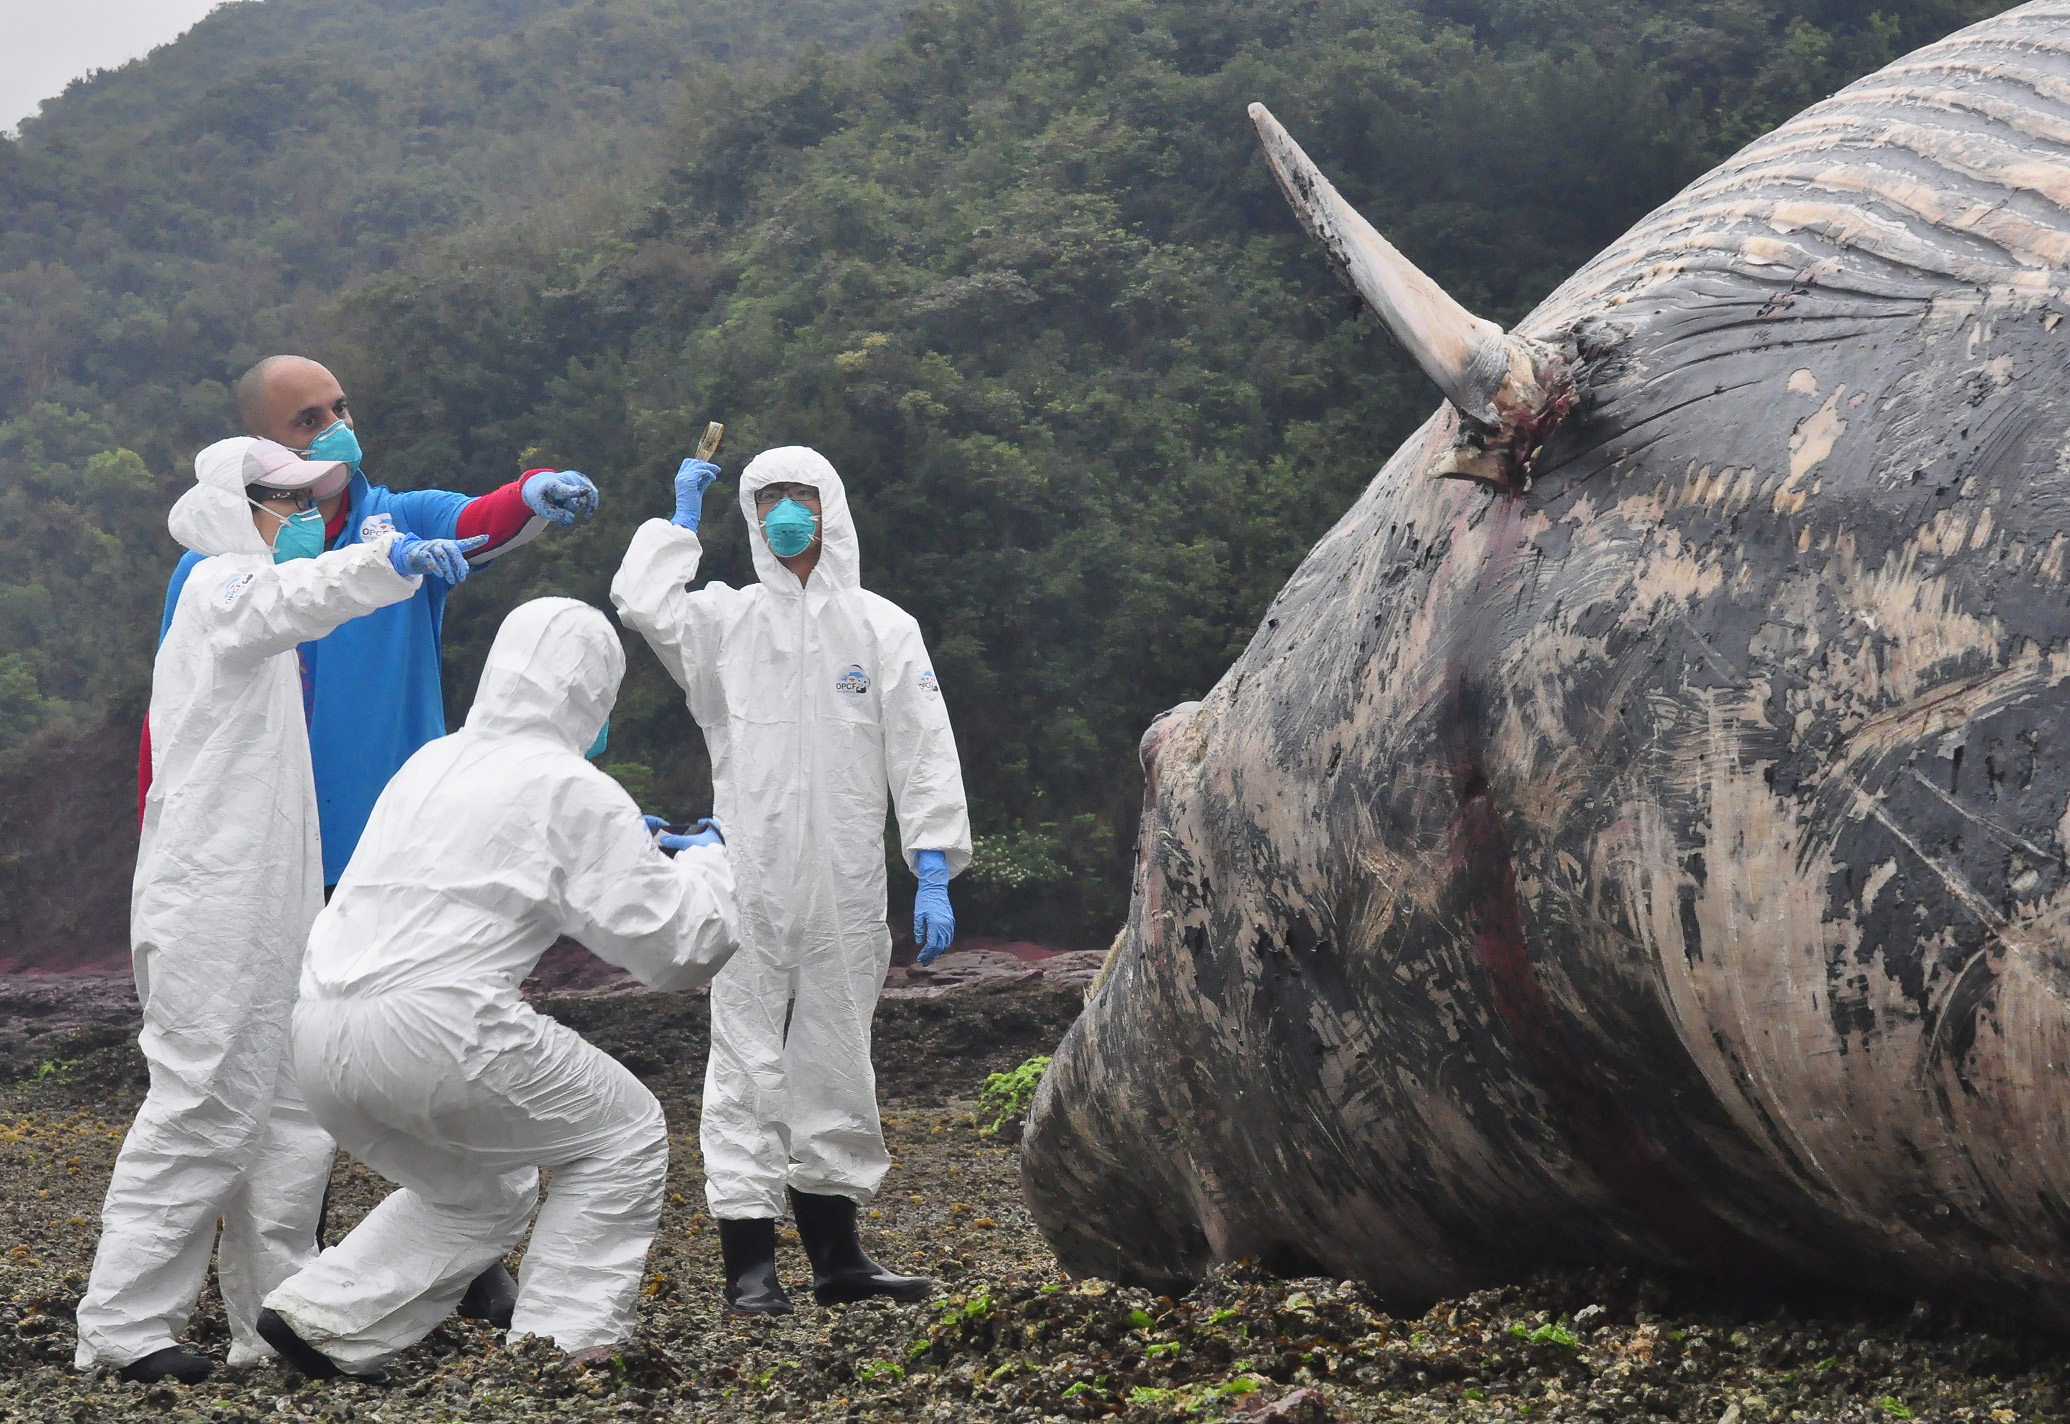 The whale is being chopped up on the beach by experts from City University and Ocean Park